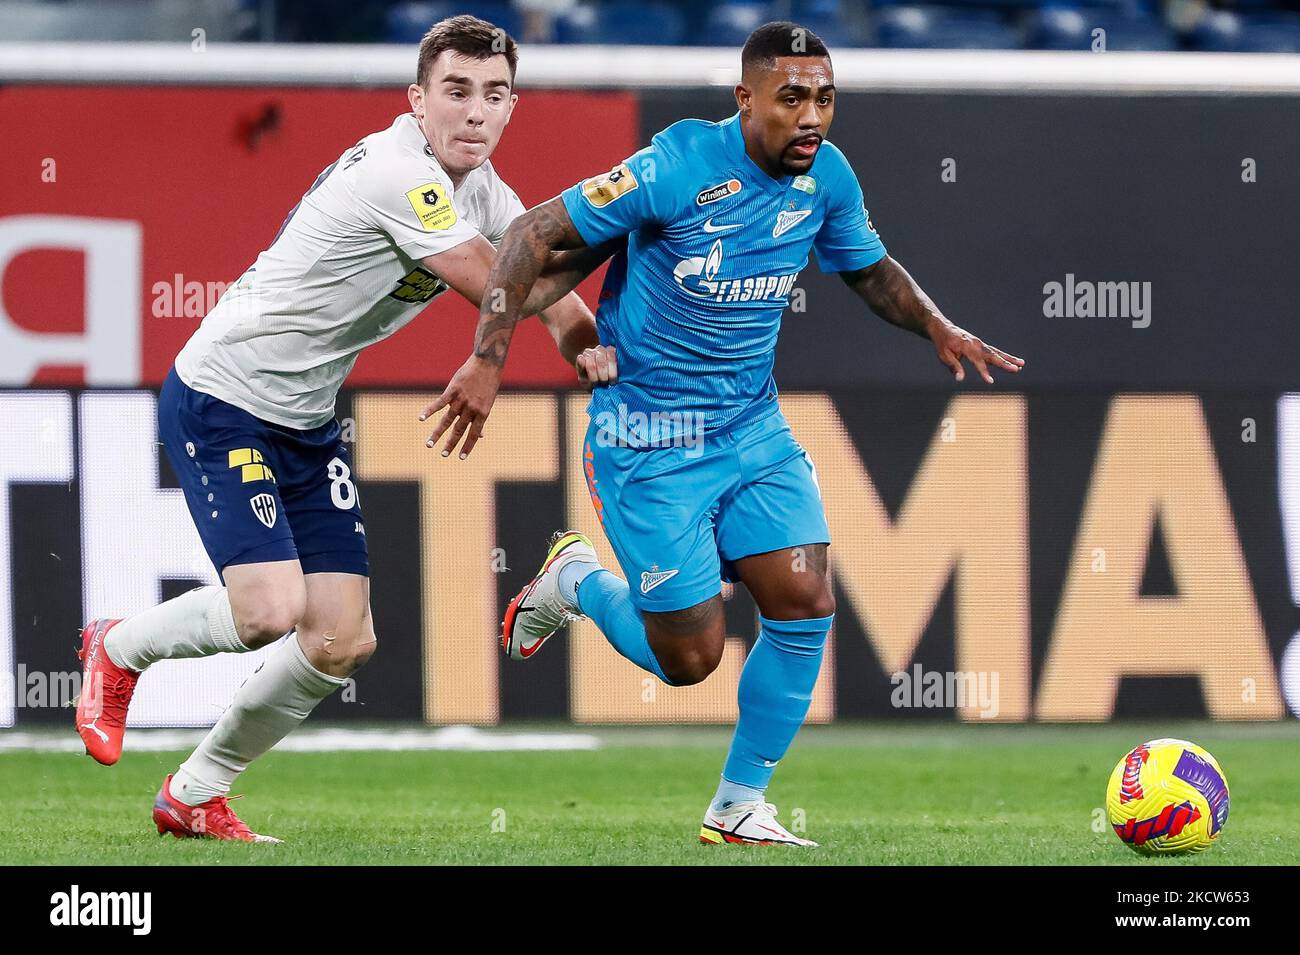 Malcom (R) of Zenit St. Petersburg and Ilya Berkovsky of Nizhny Novgorod vie for the ball during the Russian Premier League match between FC Zenit Saint Petersburg and FC Nizhny Novgorod on November 19, 2021 at Gazprom Arena in Saint Petersburg, Russia. (Photo by Mike Kireev/NurPhoto) Stock Photo